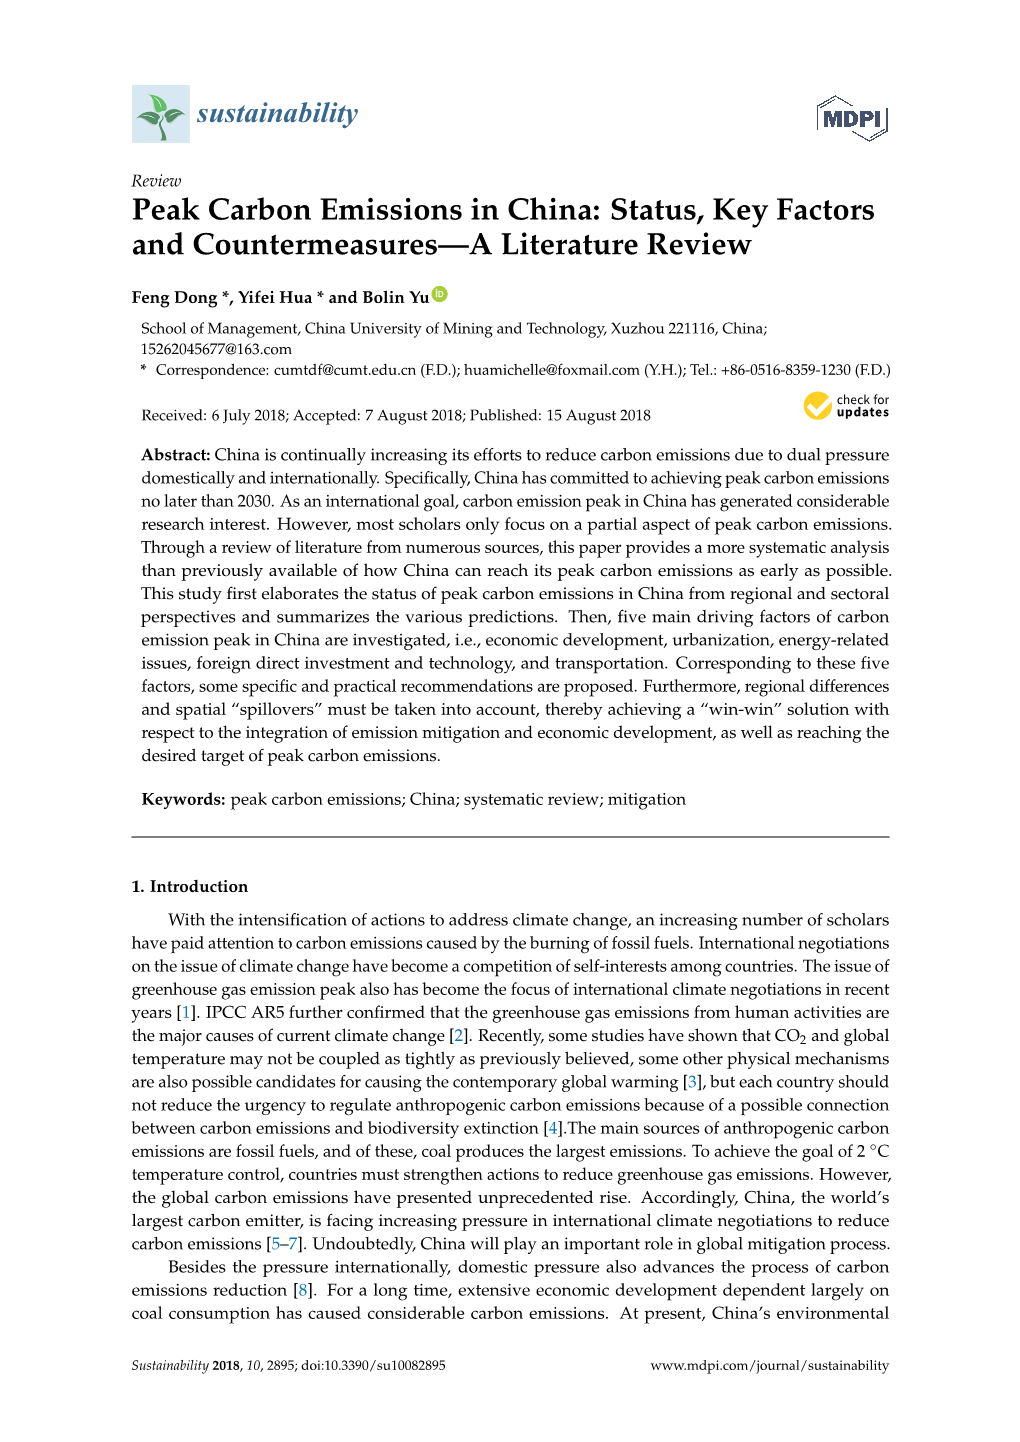 Peak Carbon Emissions in China: Status, Key Factors and Countermeasures—A Literature Review